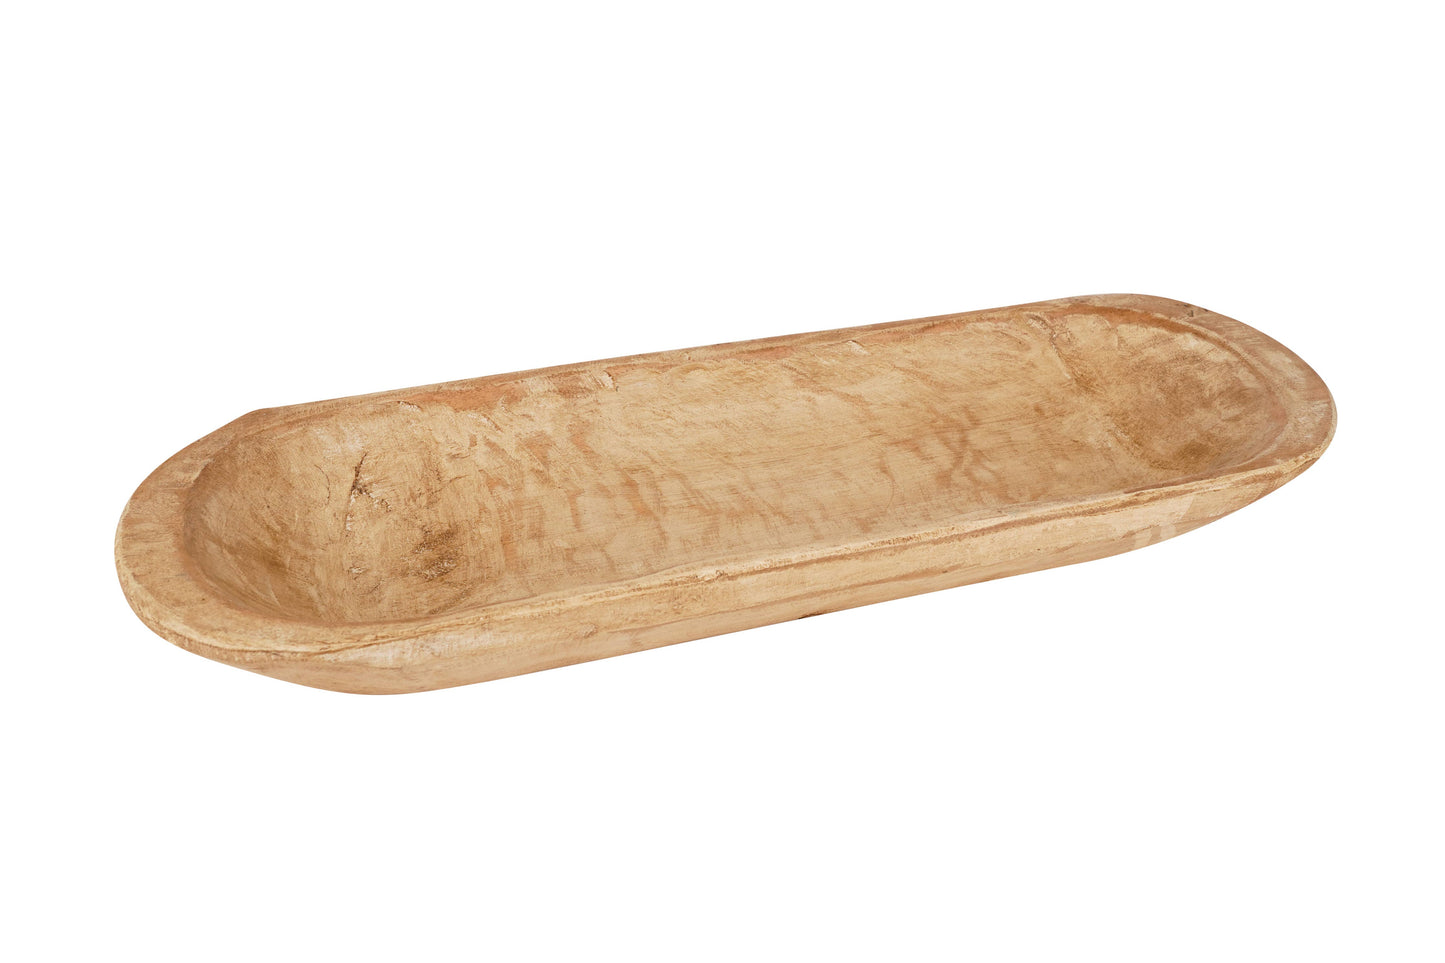 Baguette-Small Bread Bowl-Home Decor #2-Wooden-6x20 inches: White